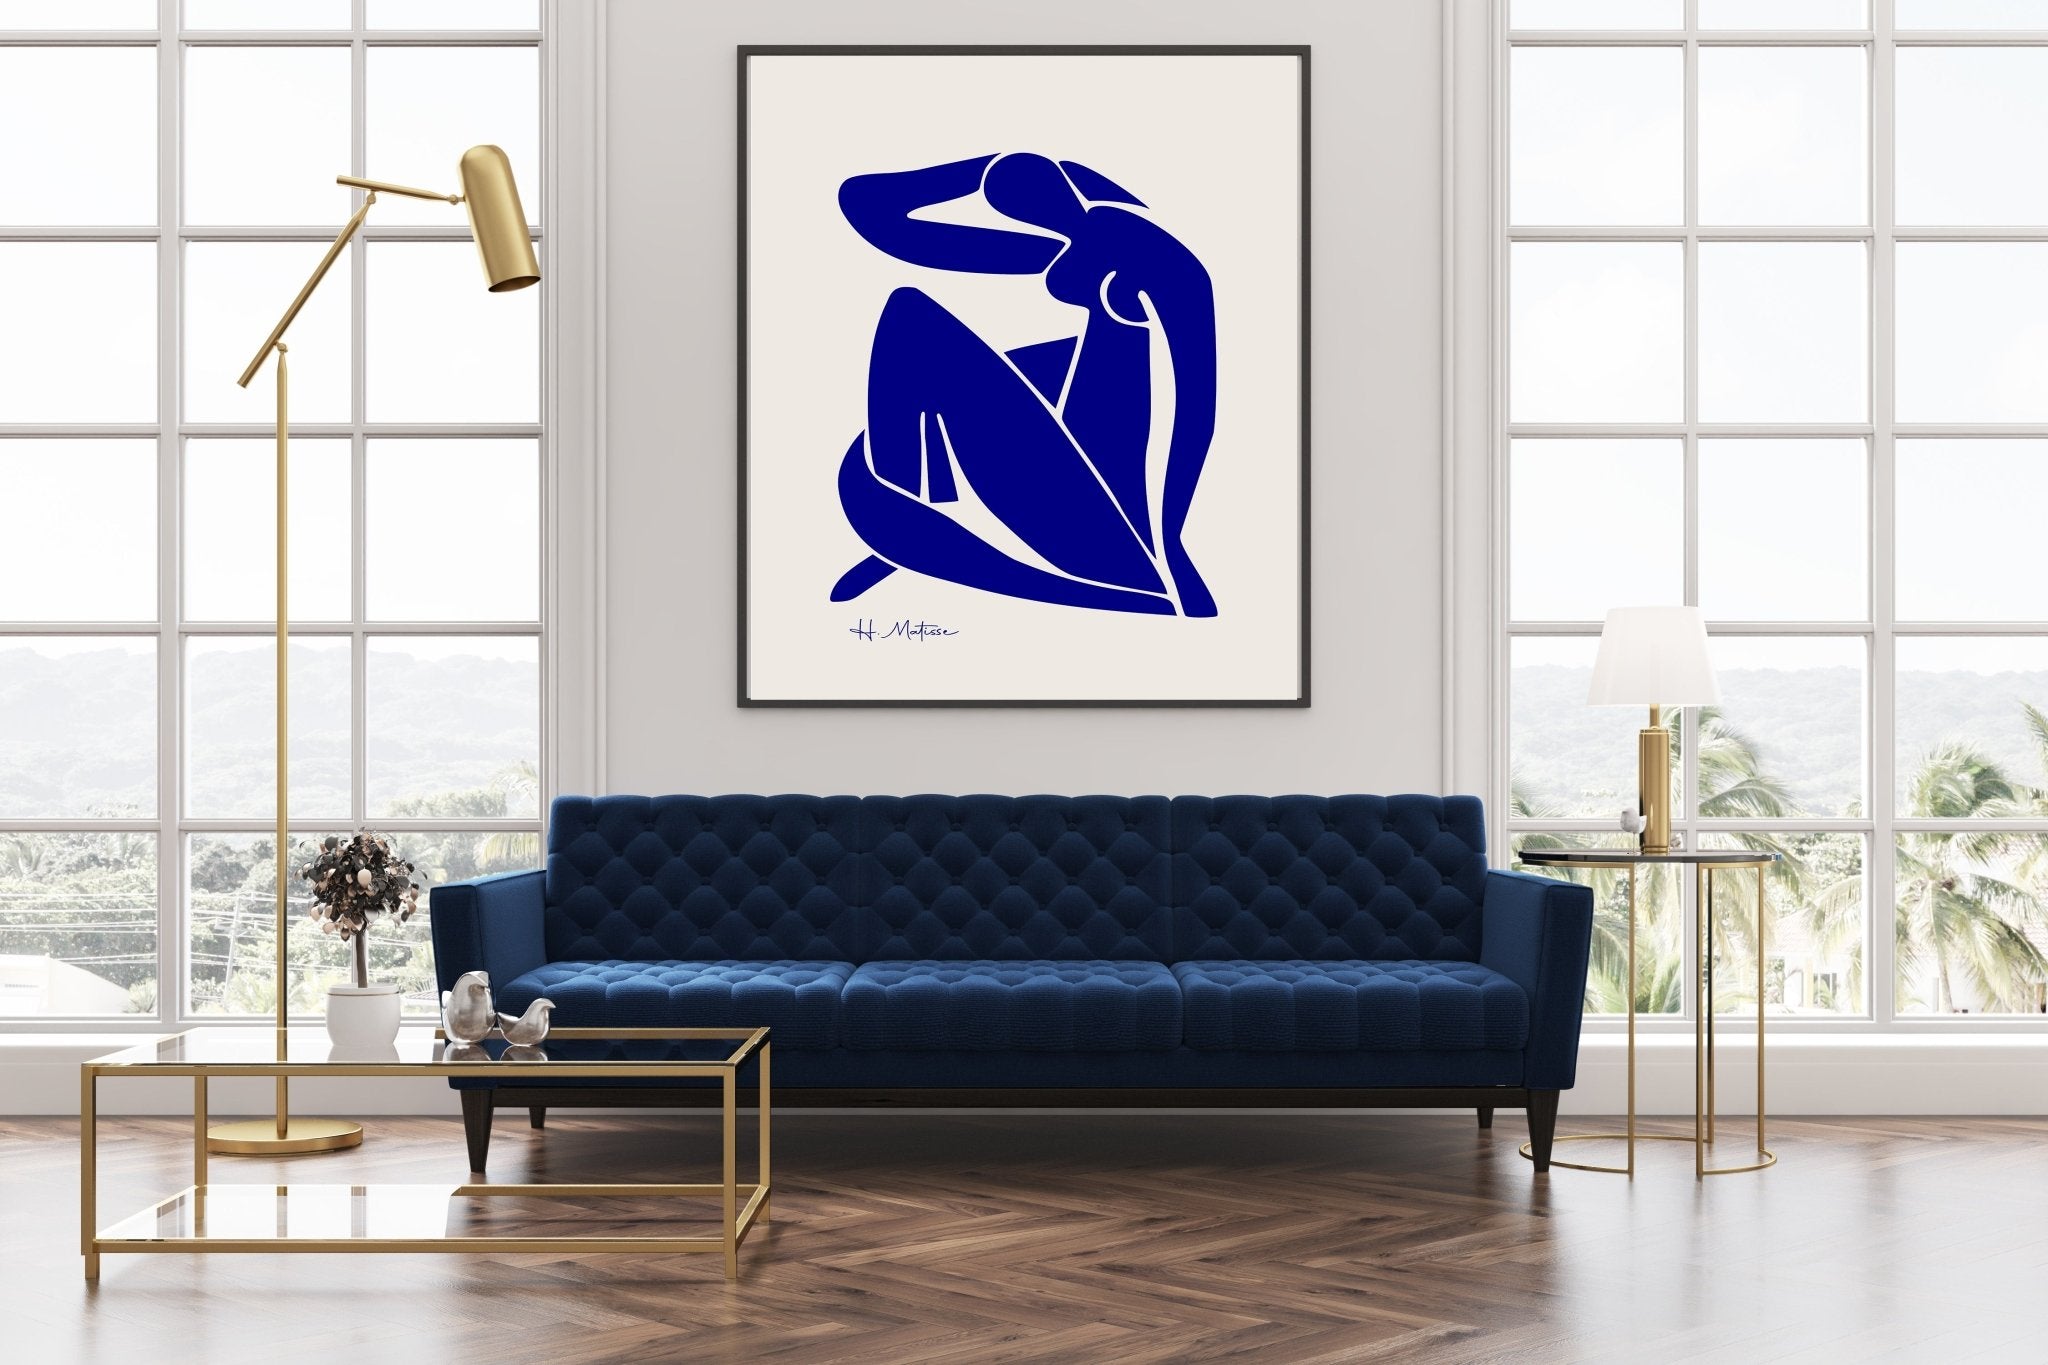 Matisse Blue Pose - D'Luxe Prints